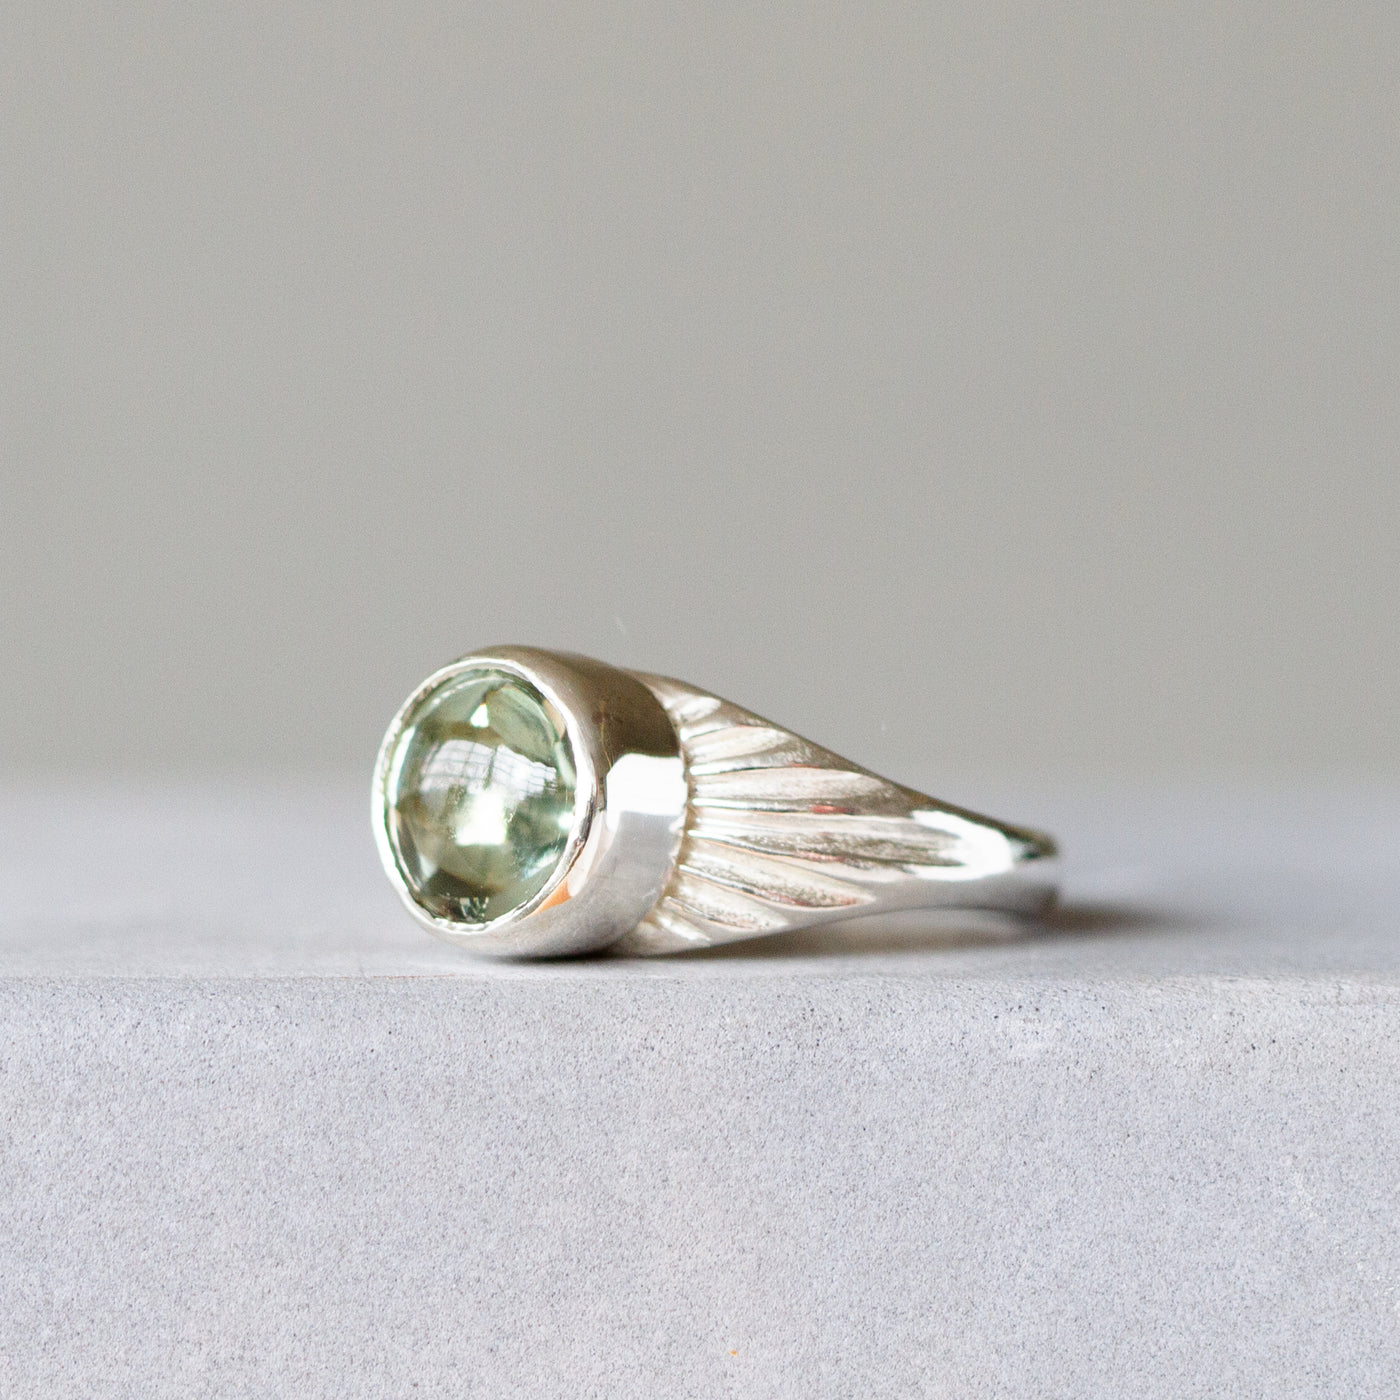 Green Amethyst and Silver Calista Ring